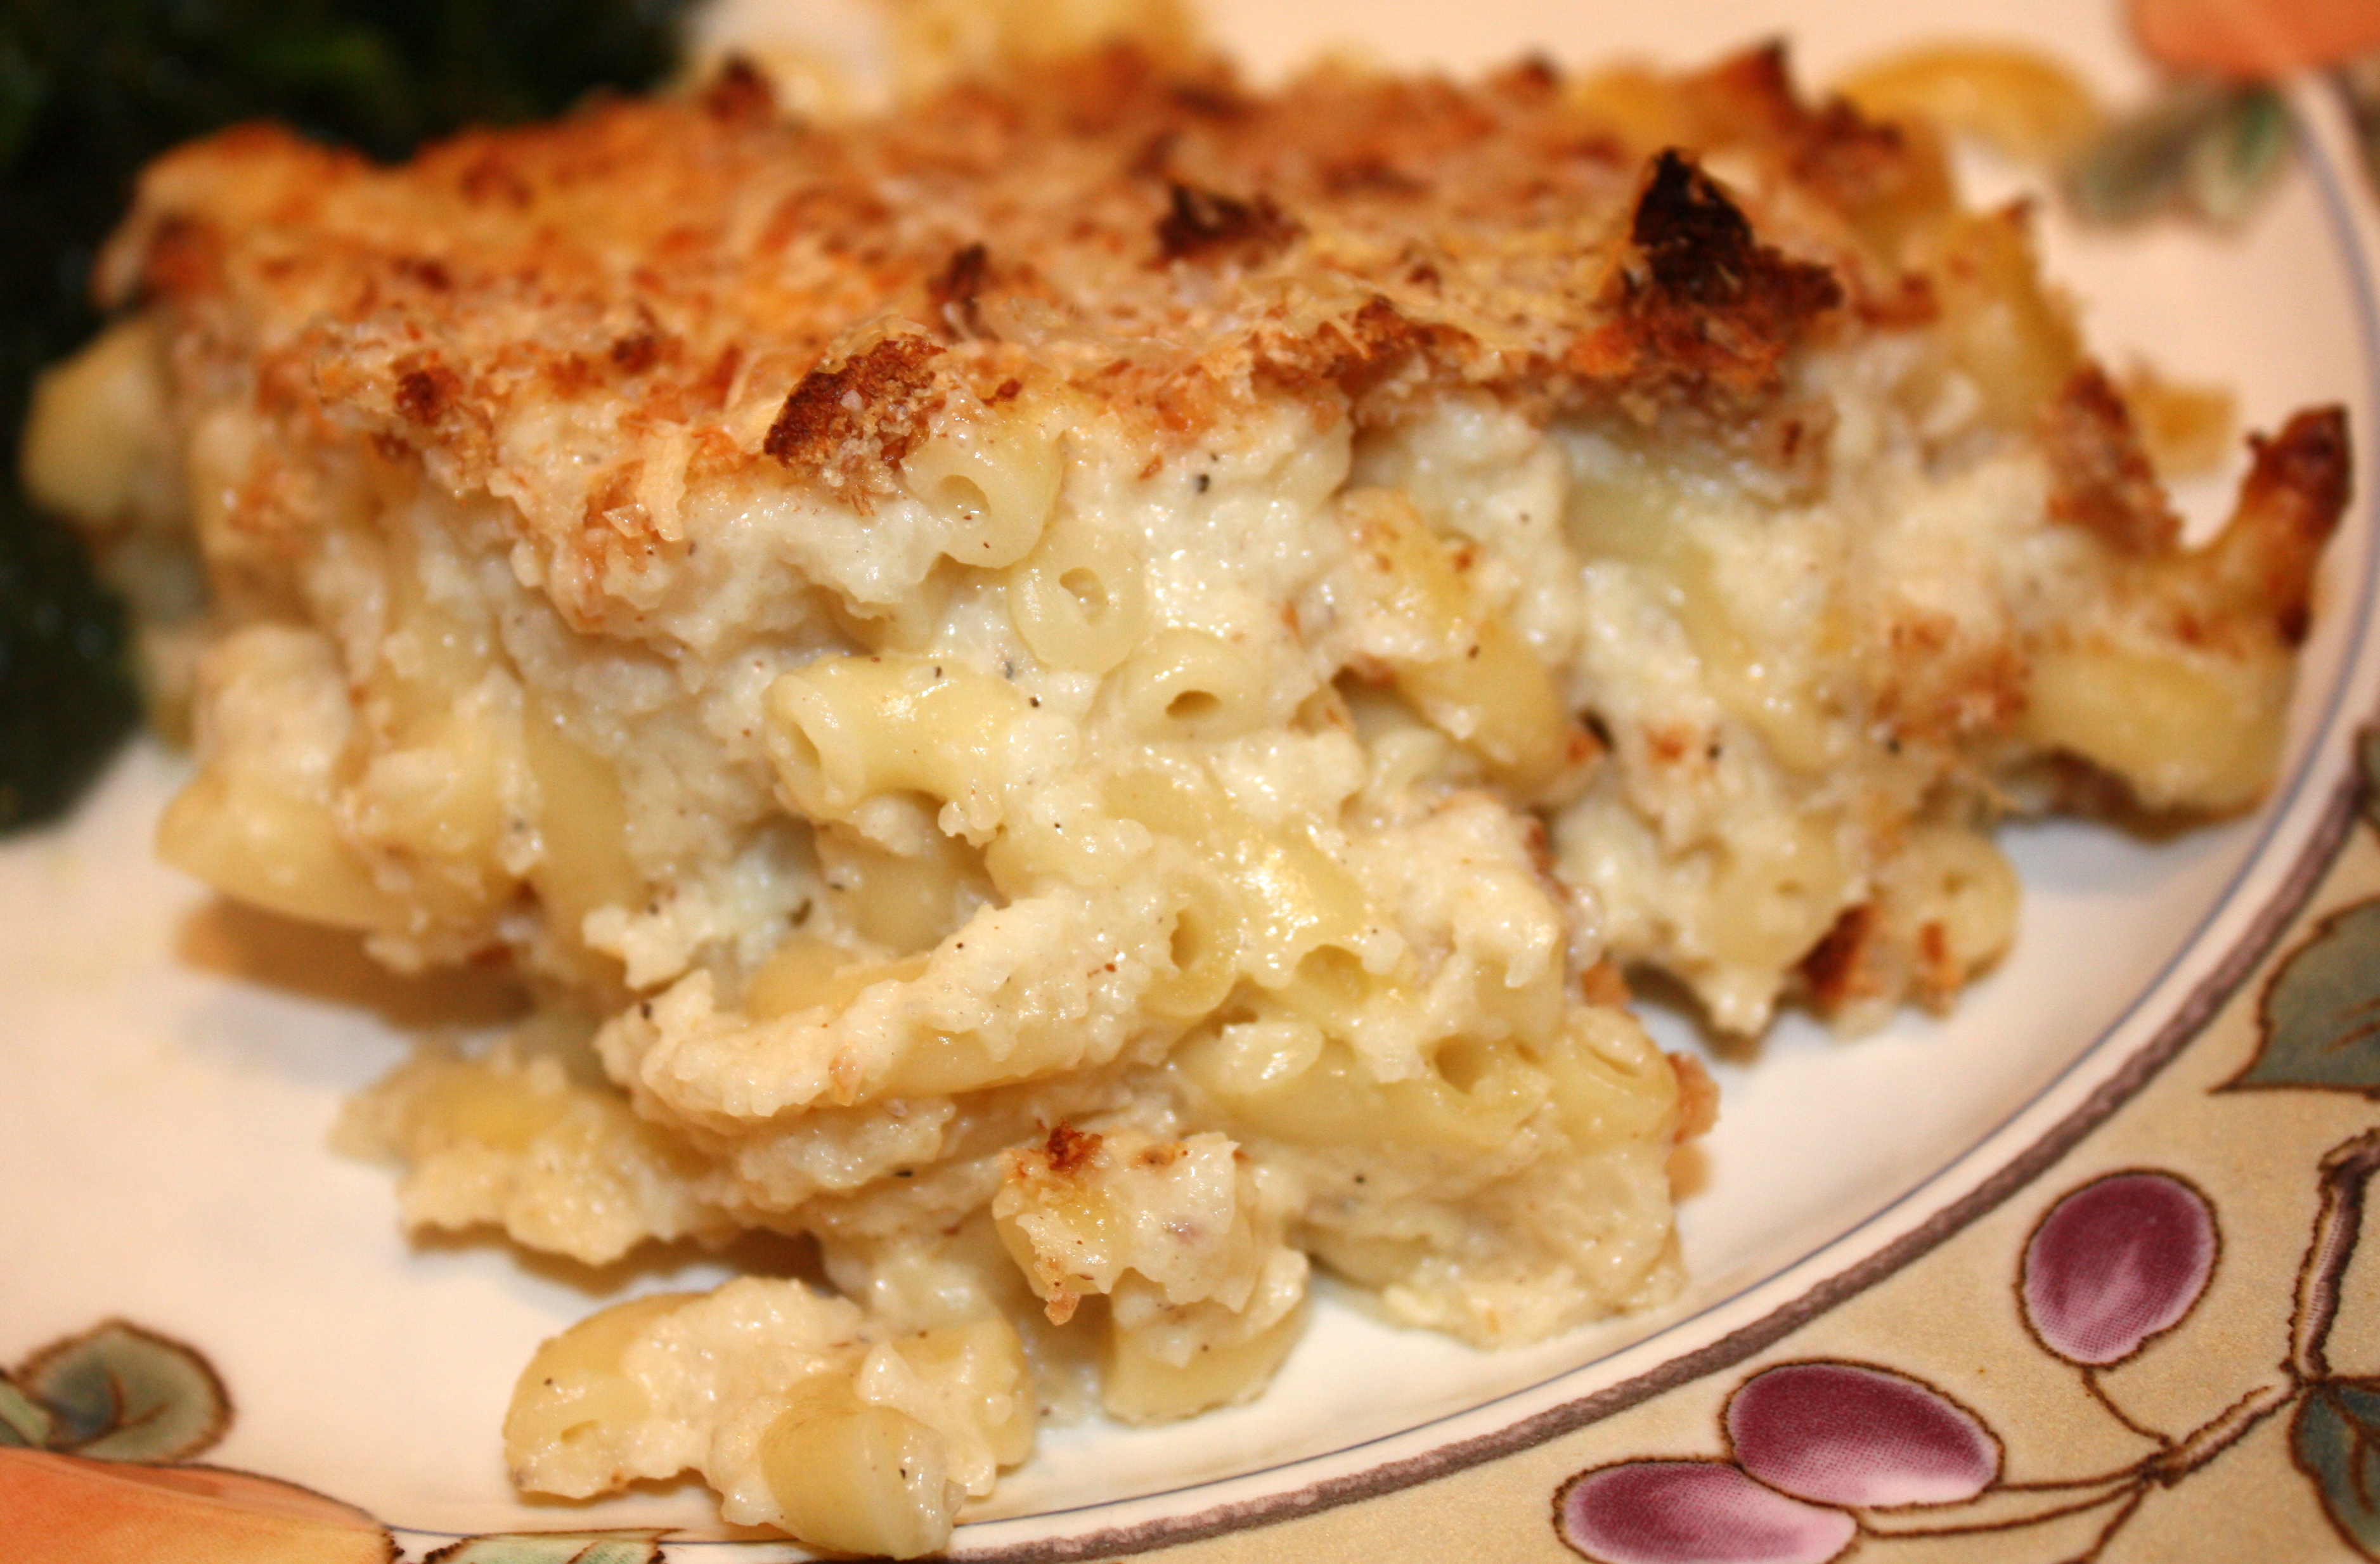 Make a Light and Healthy Macaroni and Cheese - This recipe has a surprise ingredient that replaces milk or cream used in traditional macaroni and cheese, cauliflower.